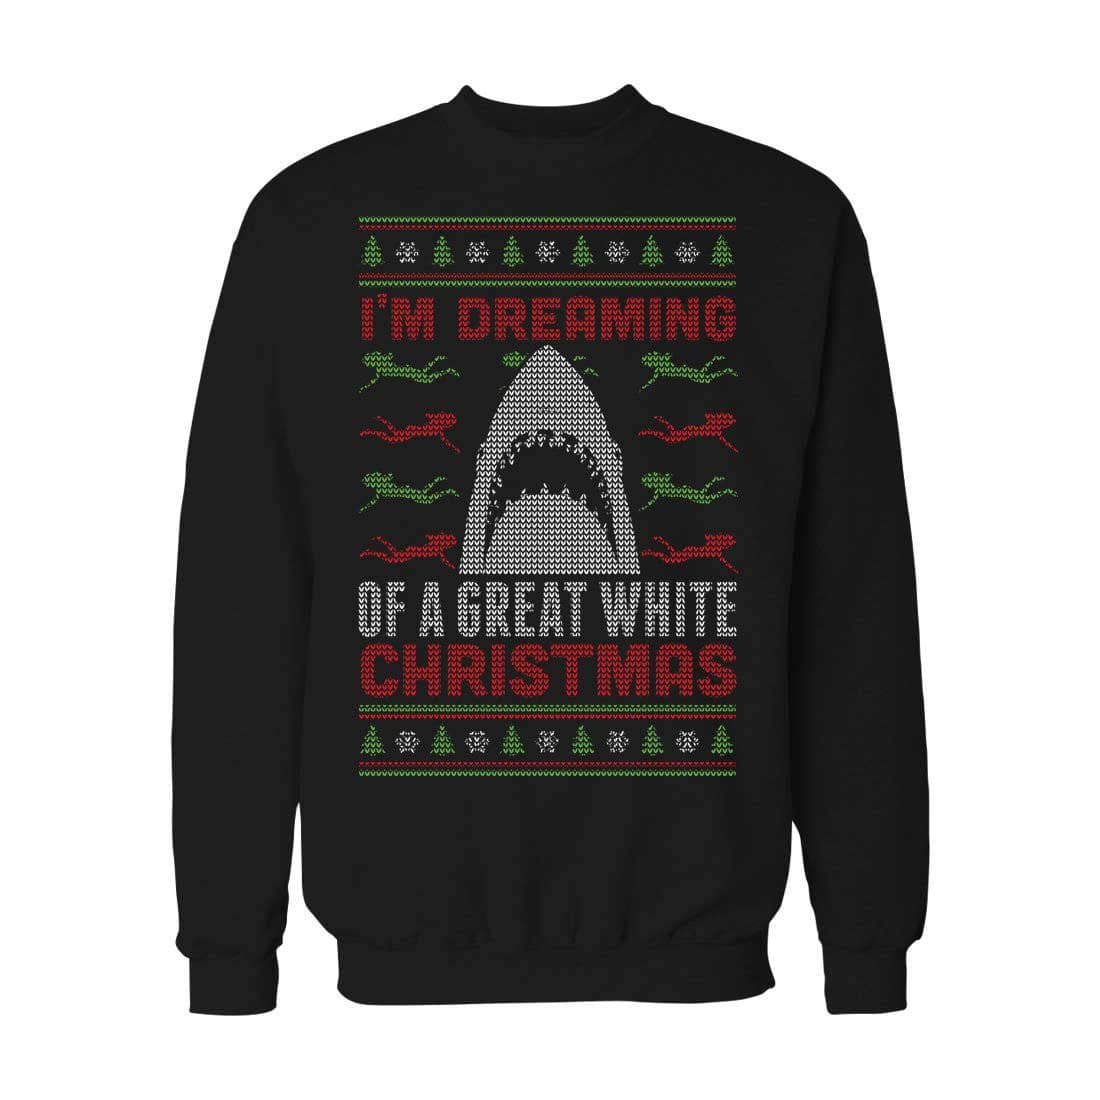 Great White Christmas